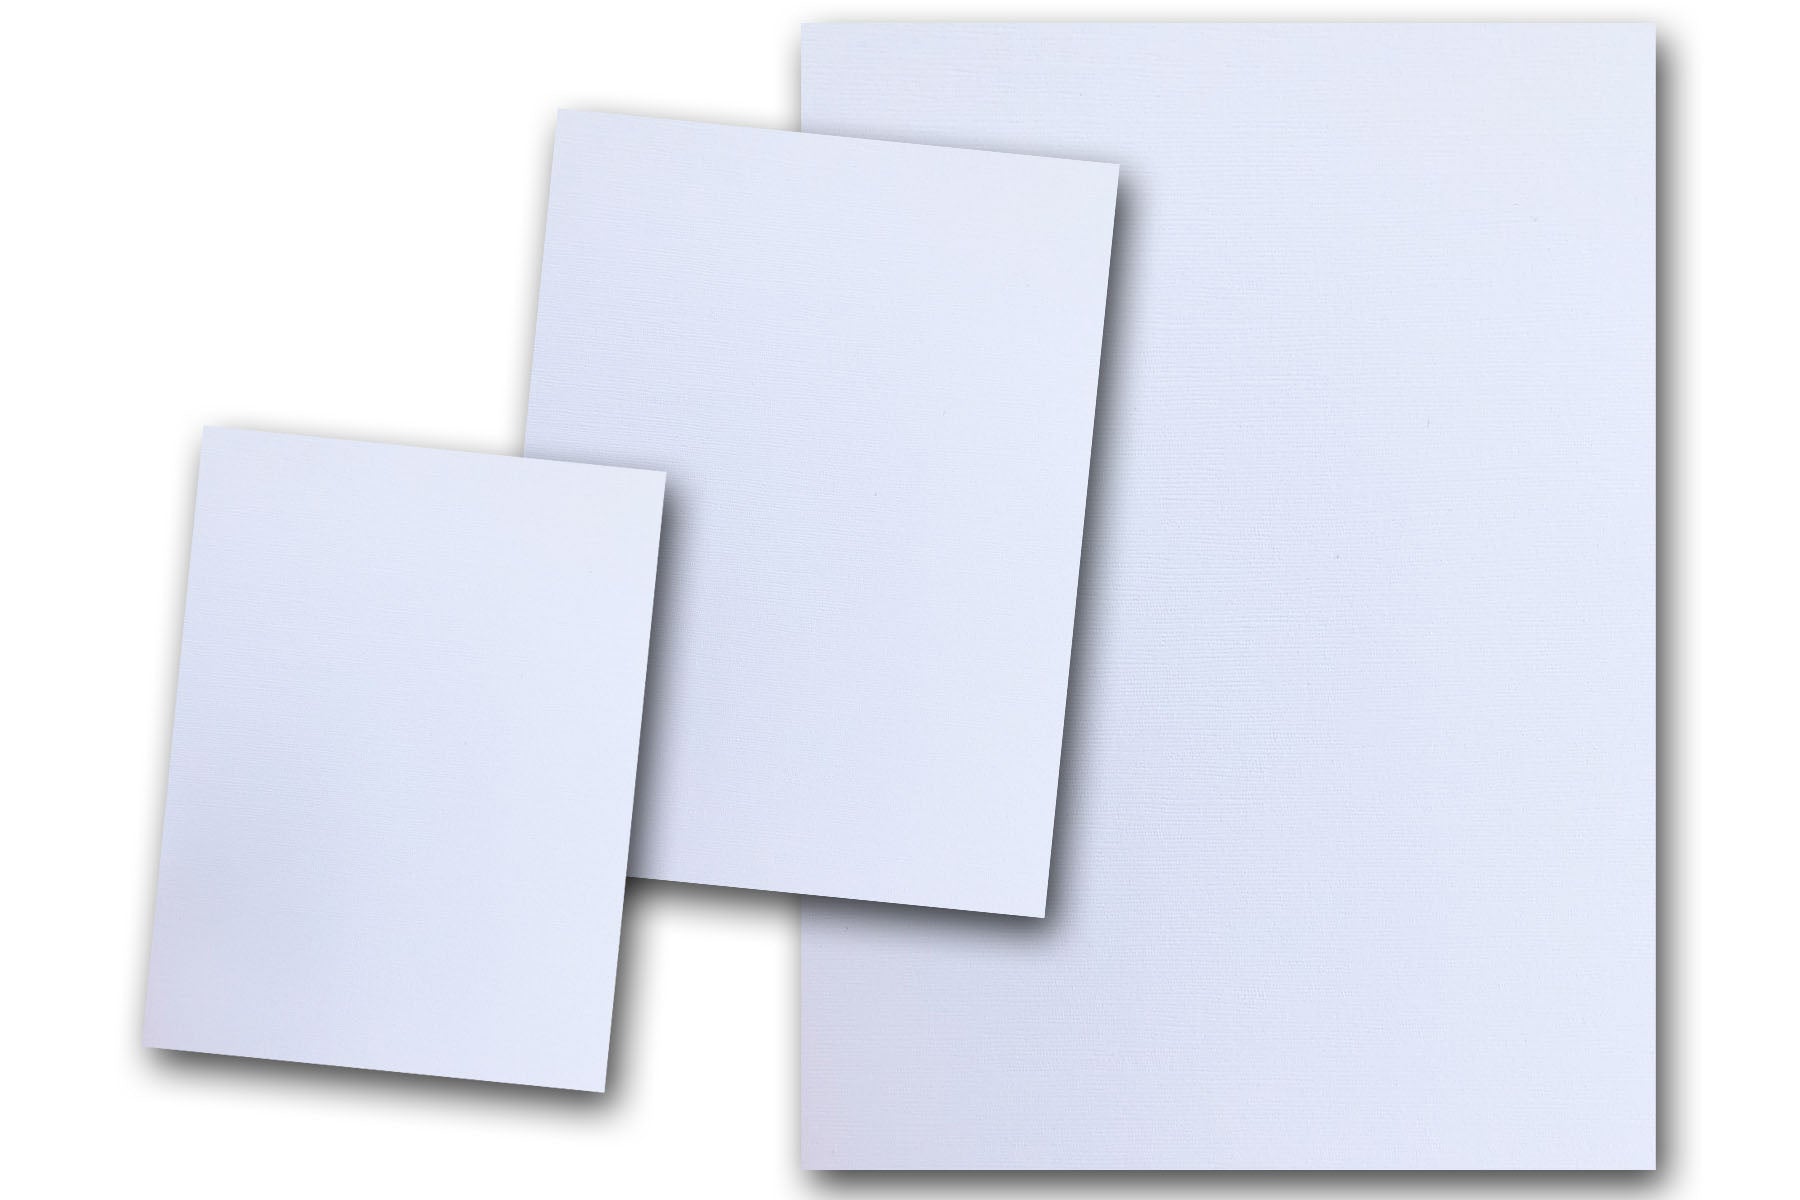 Textured White Discount Card Stock for DIY Cards and Diecutting -  CutCardStock